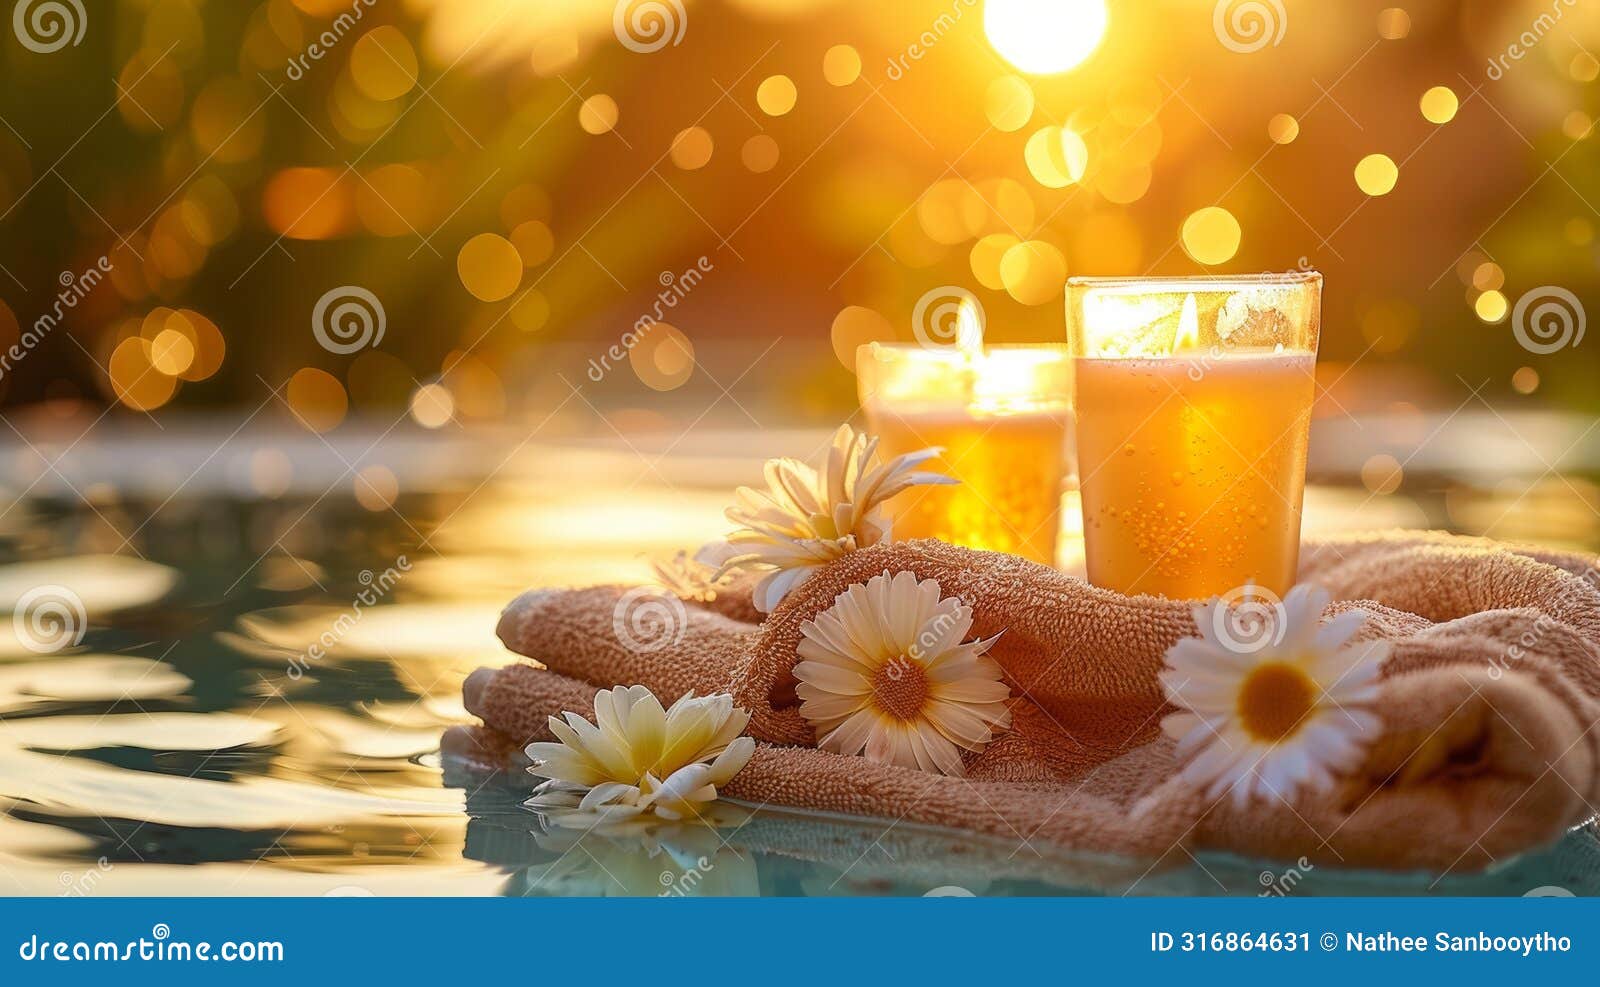 spa ambiance with candles and flowers at sunset